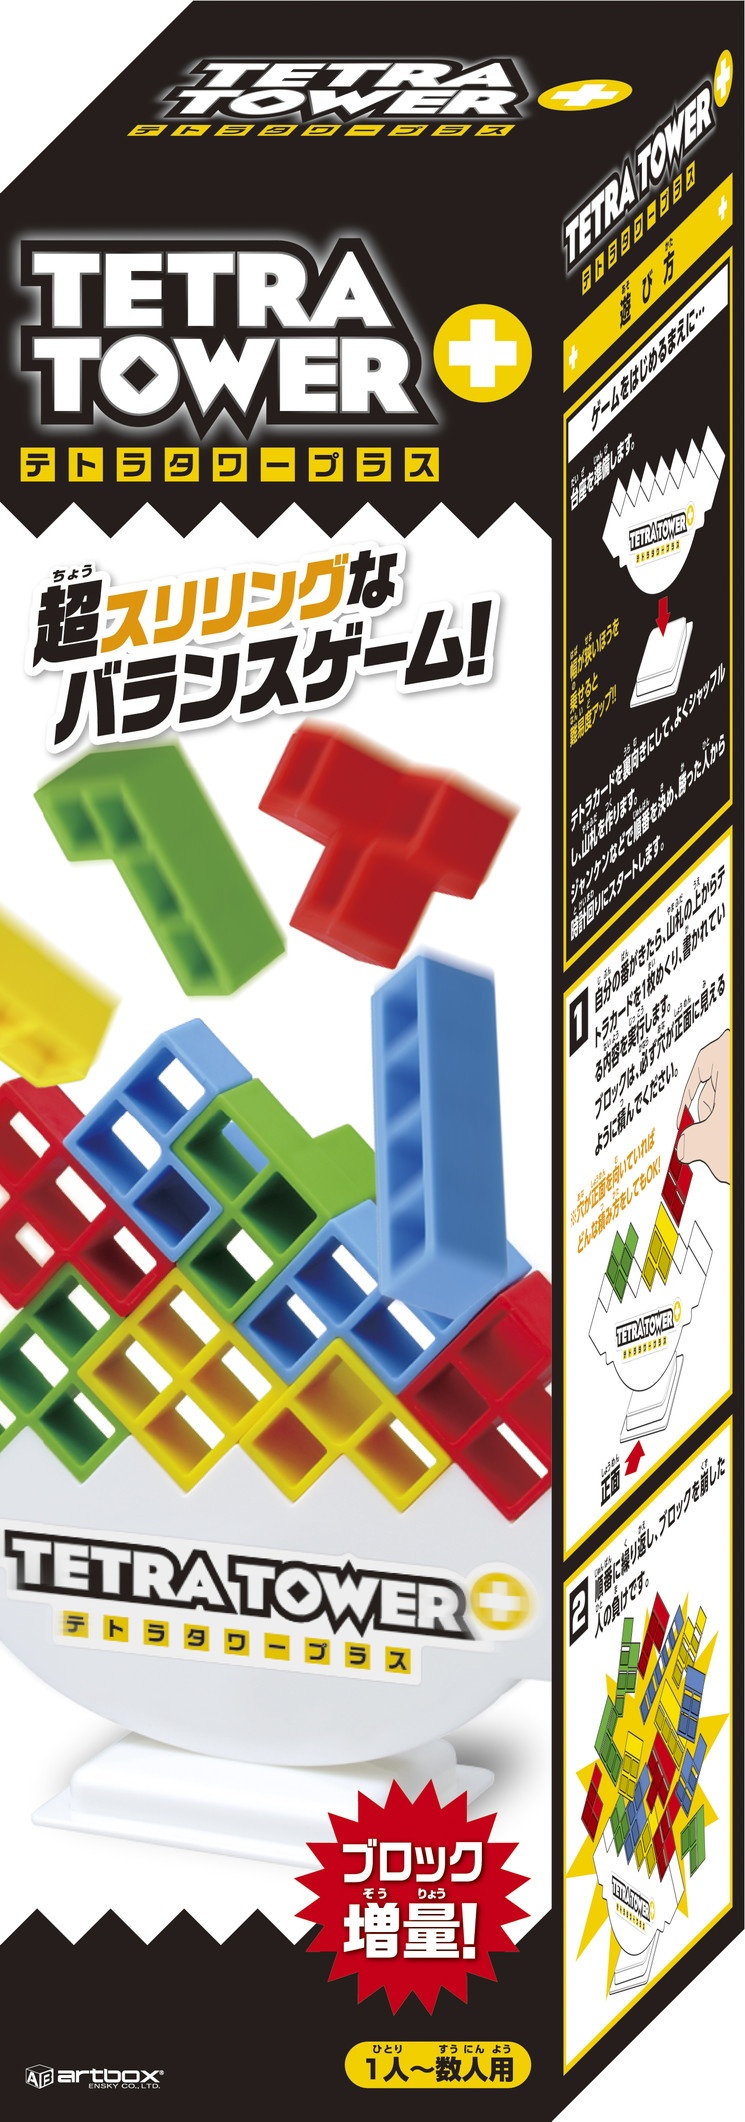 Tetra Tower Plus (Board Game) - HobbySearch Toy Store